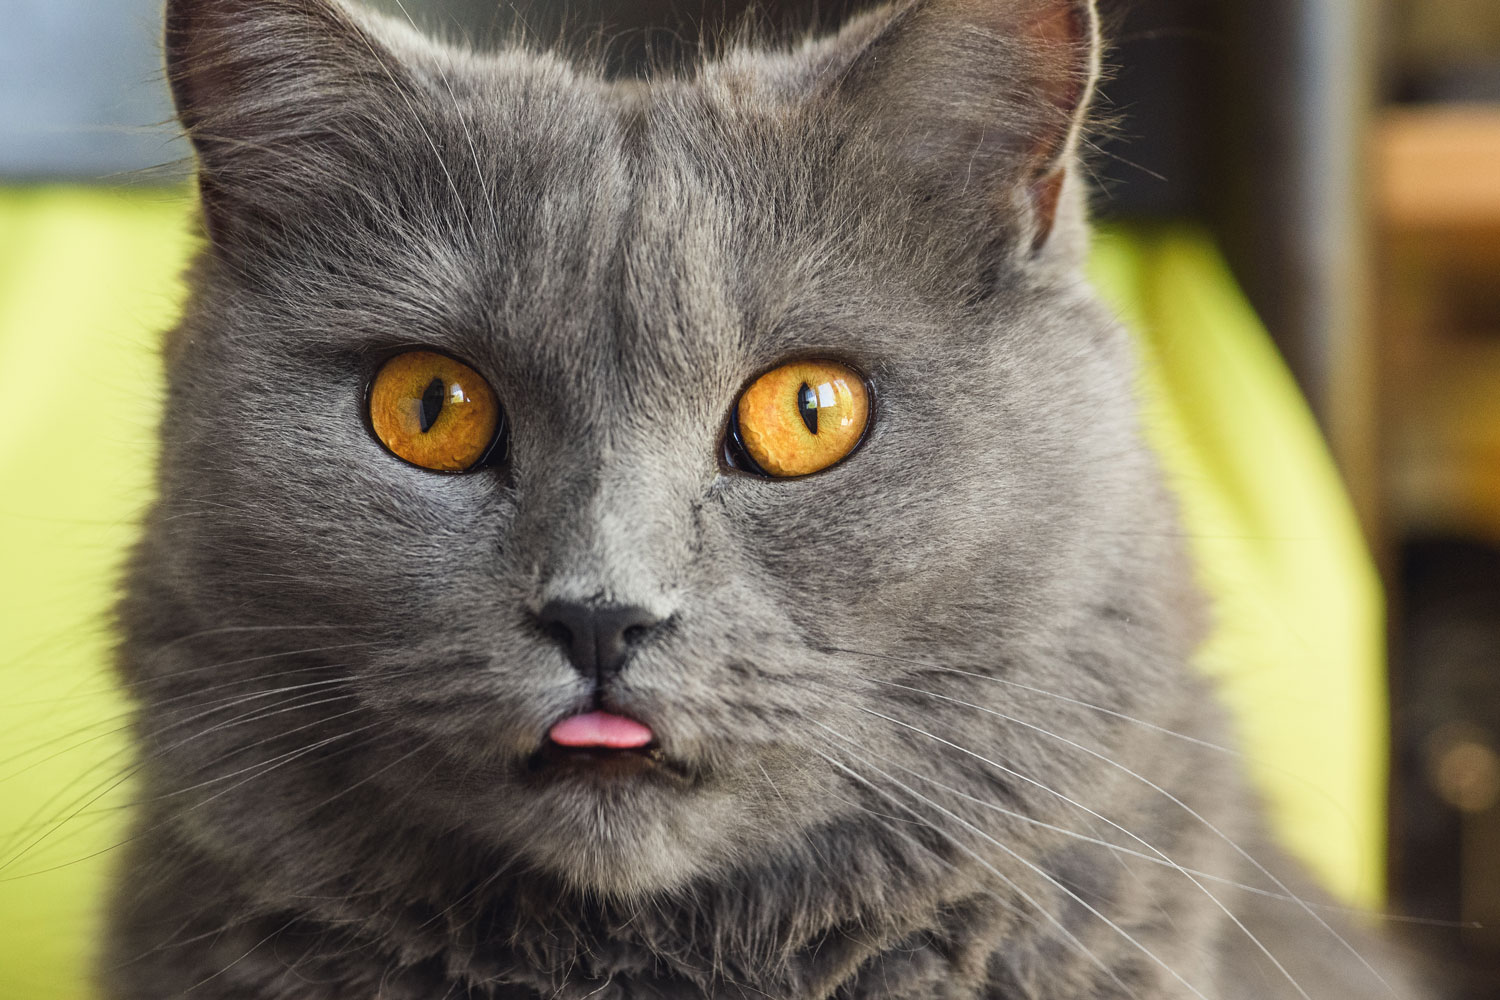 A gray Chartreux cat sticking out his tongue while looking at the camera